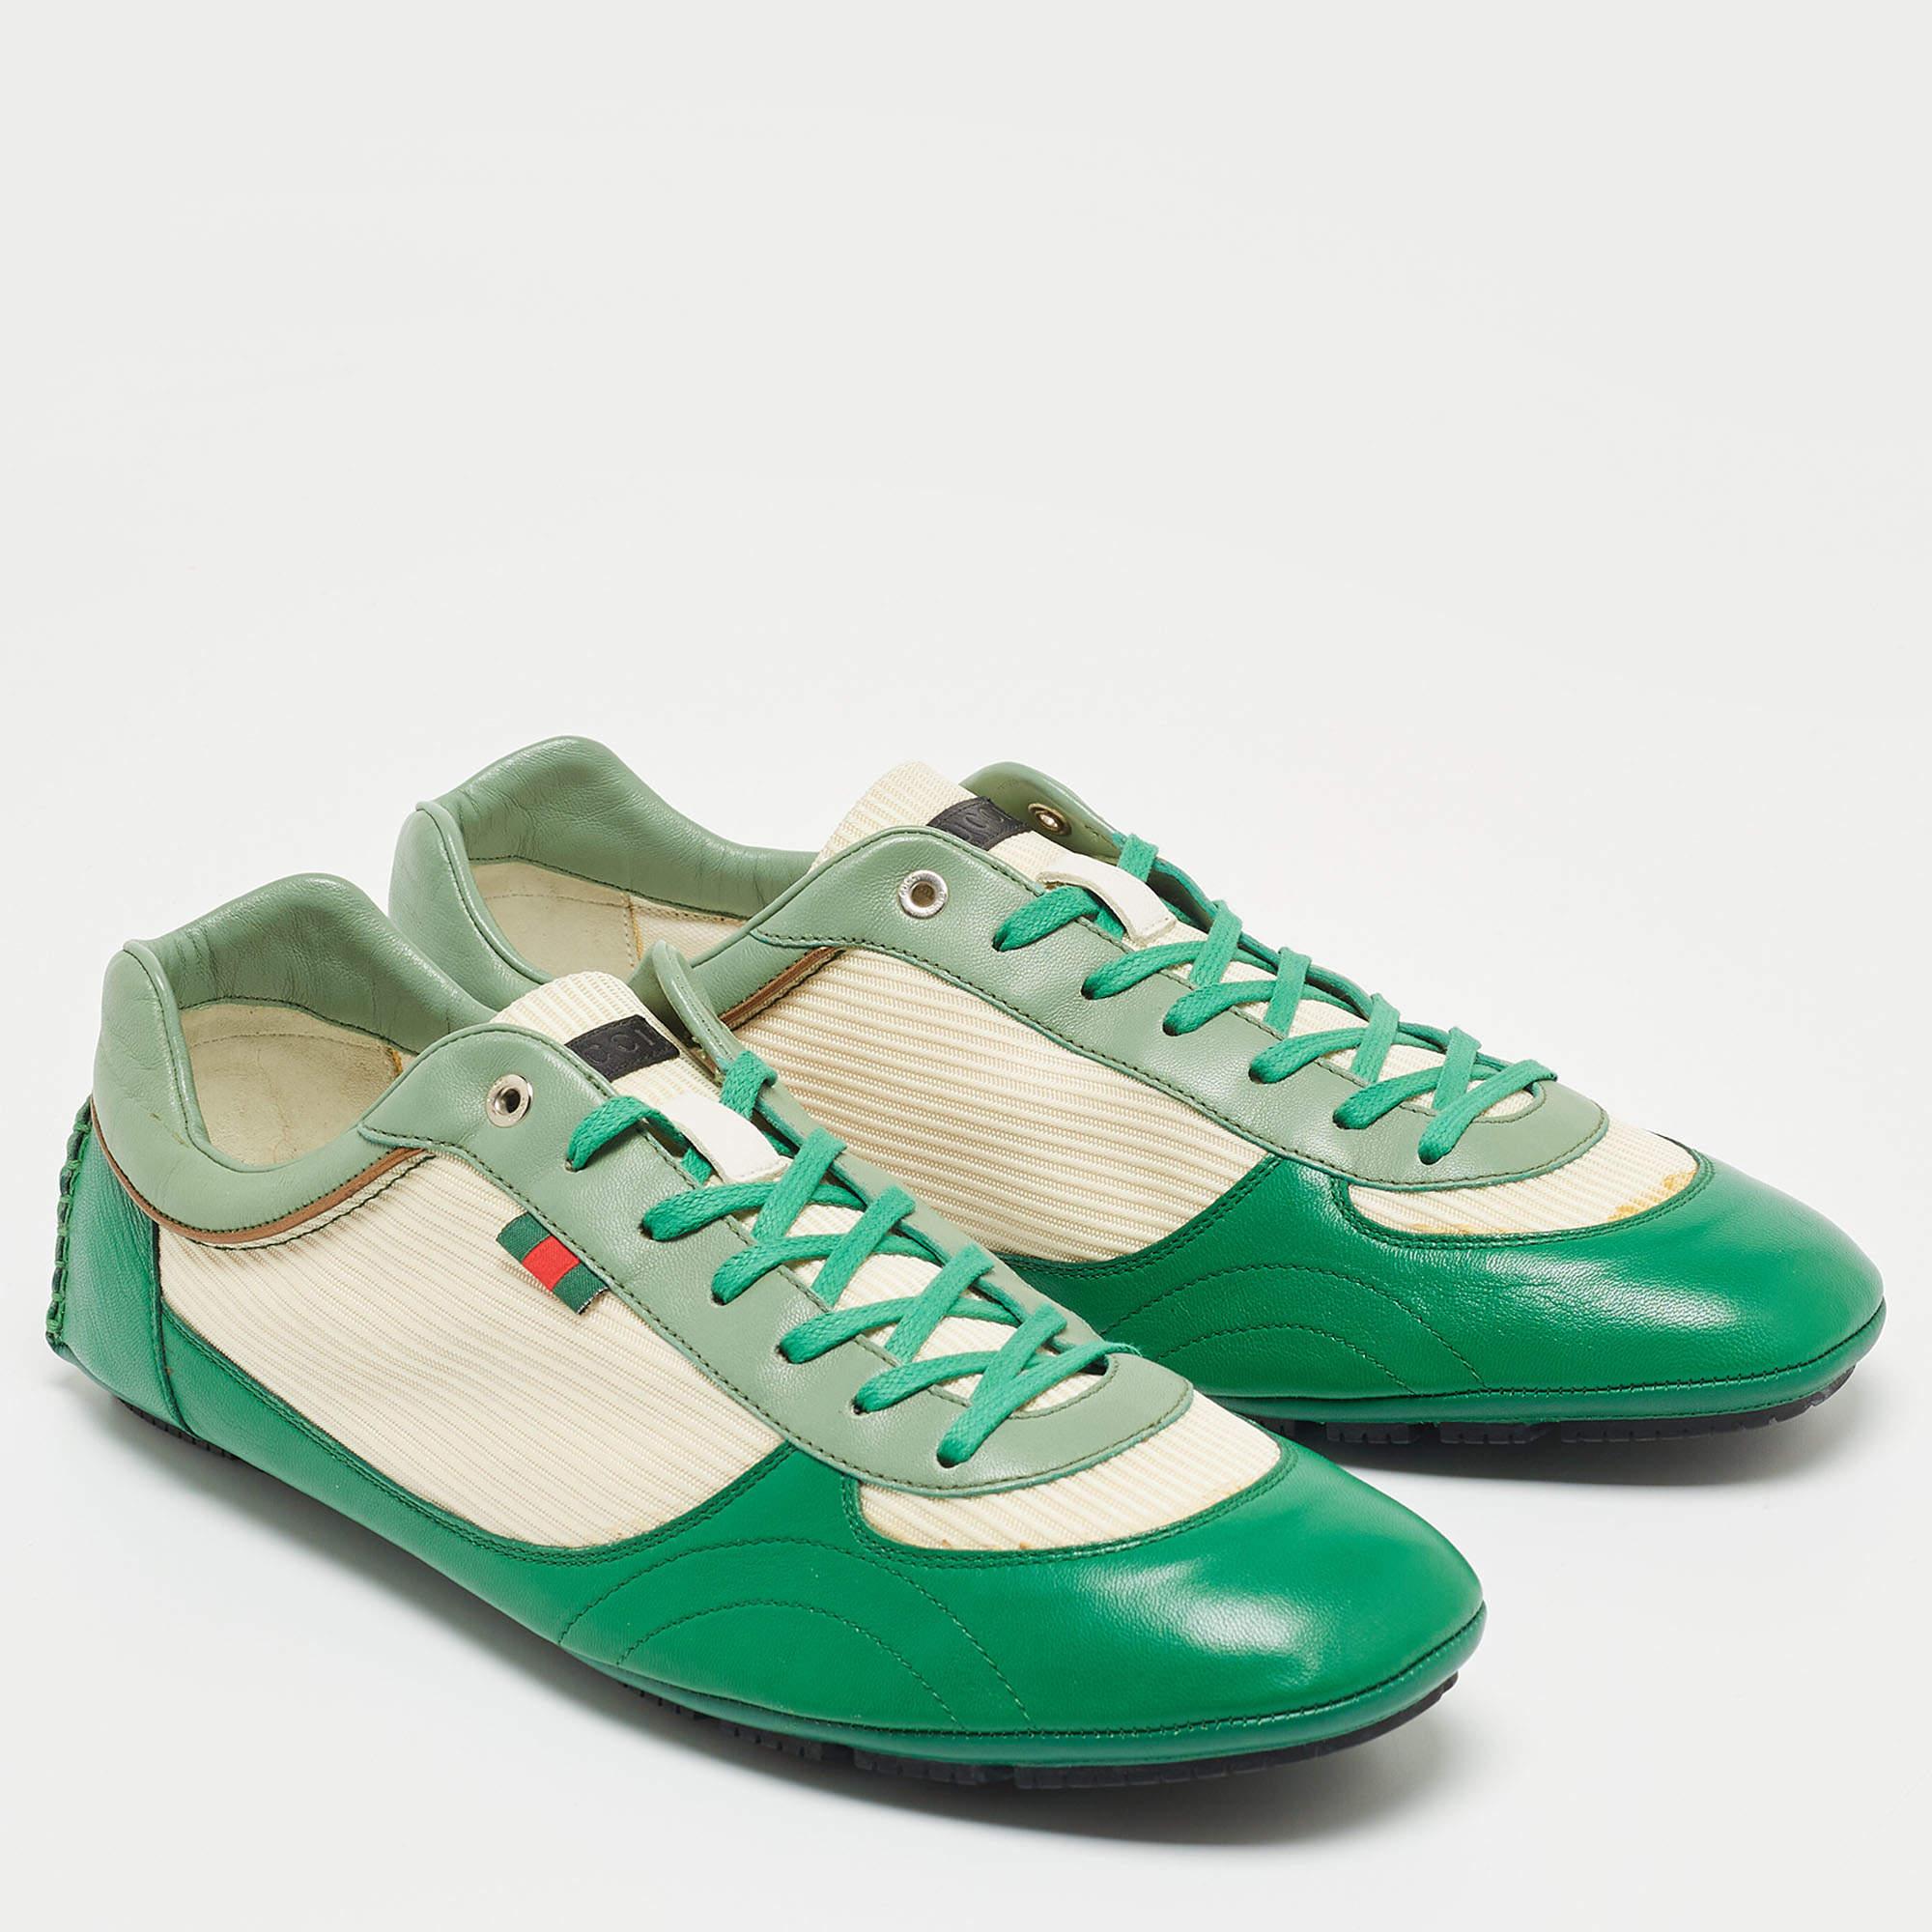 Give your outfit a luxe update with this pair of Gucci green sneakers. The shoes are sewn perfectly to help you make a statement in them for a long time.

